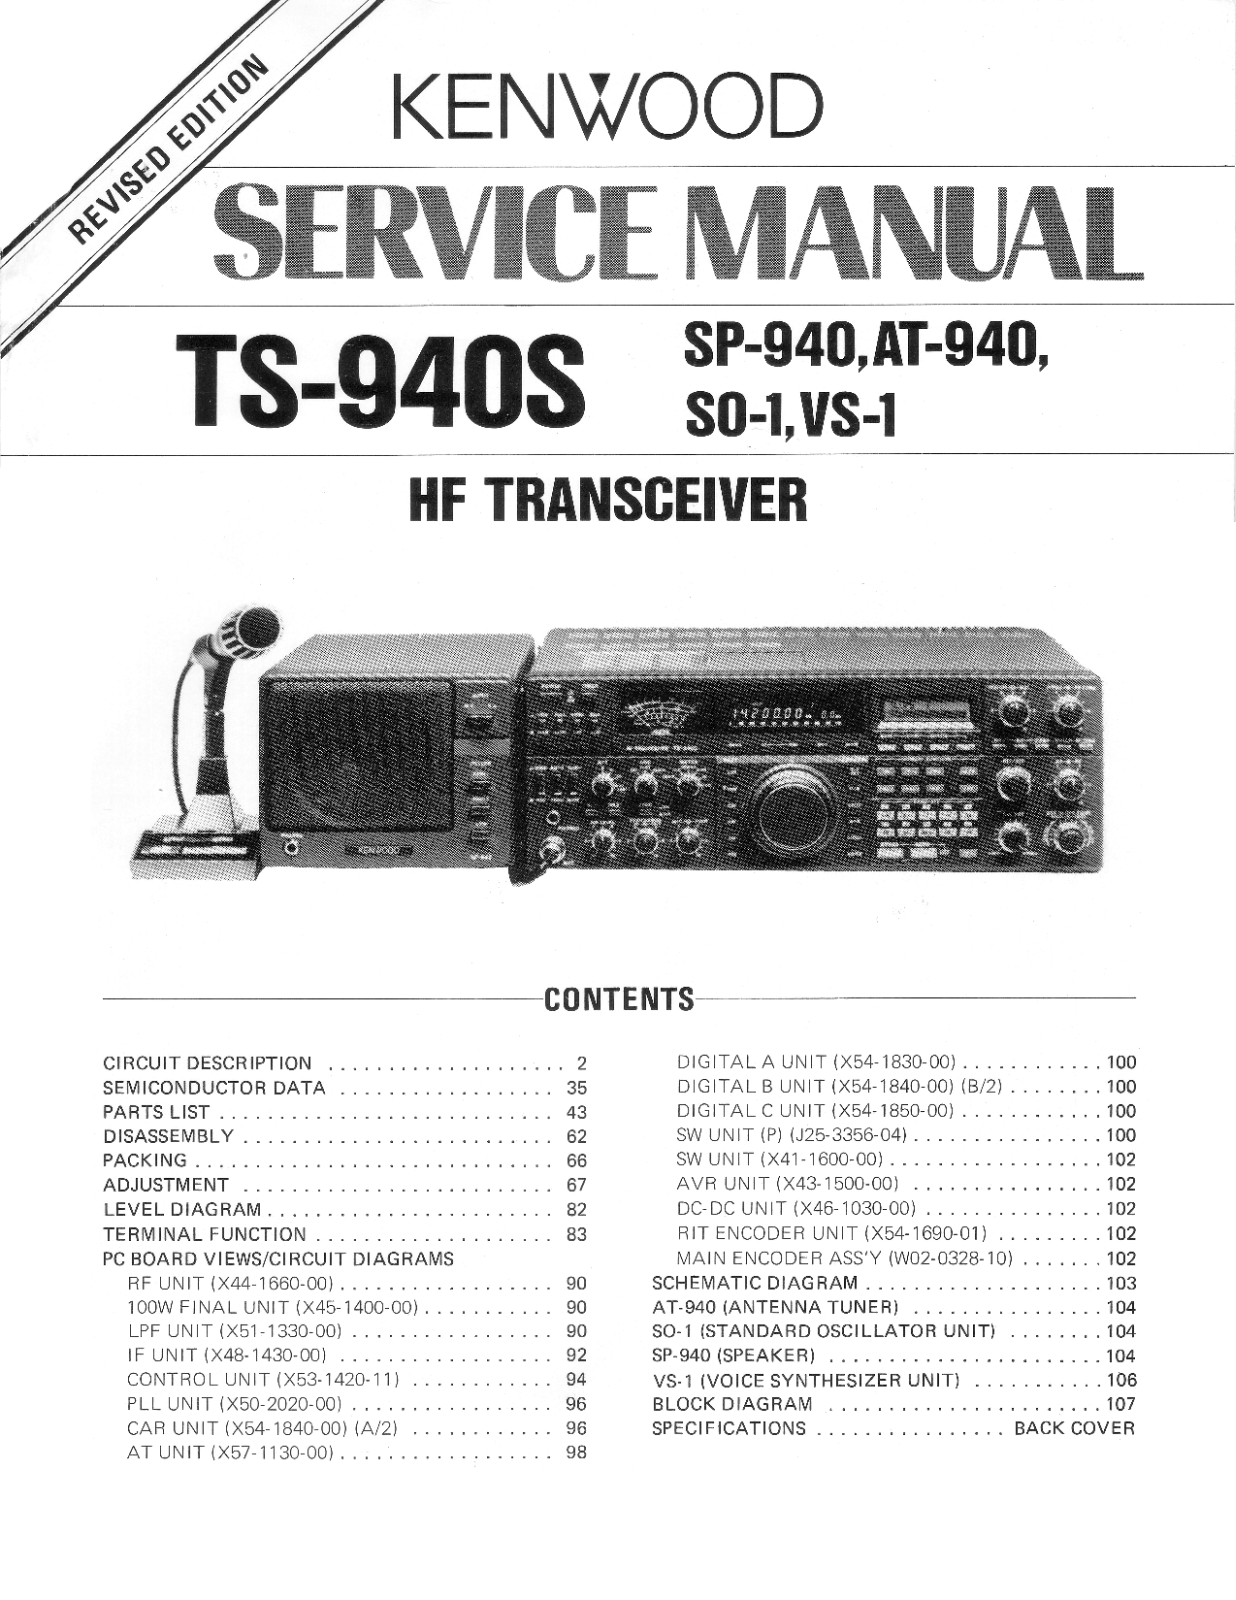 Kenwood VO-1, SO-1, AT-940, SP-949, TS-940S Service Manual